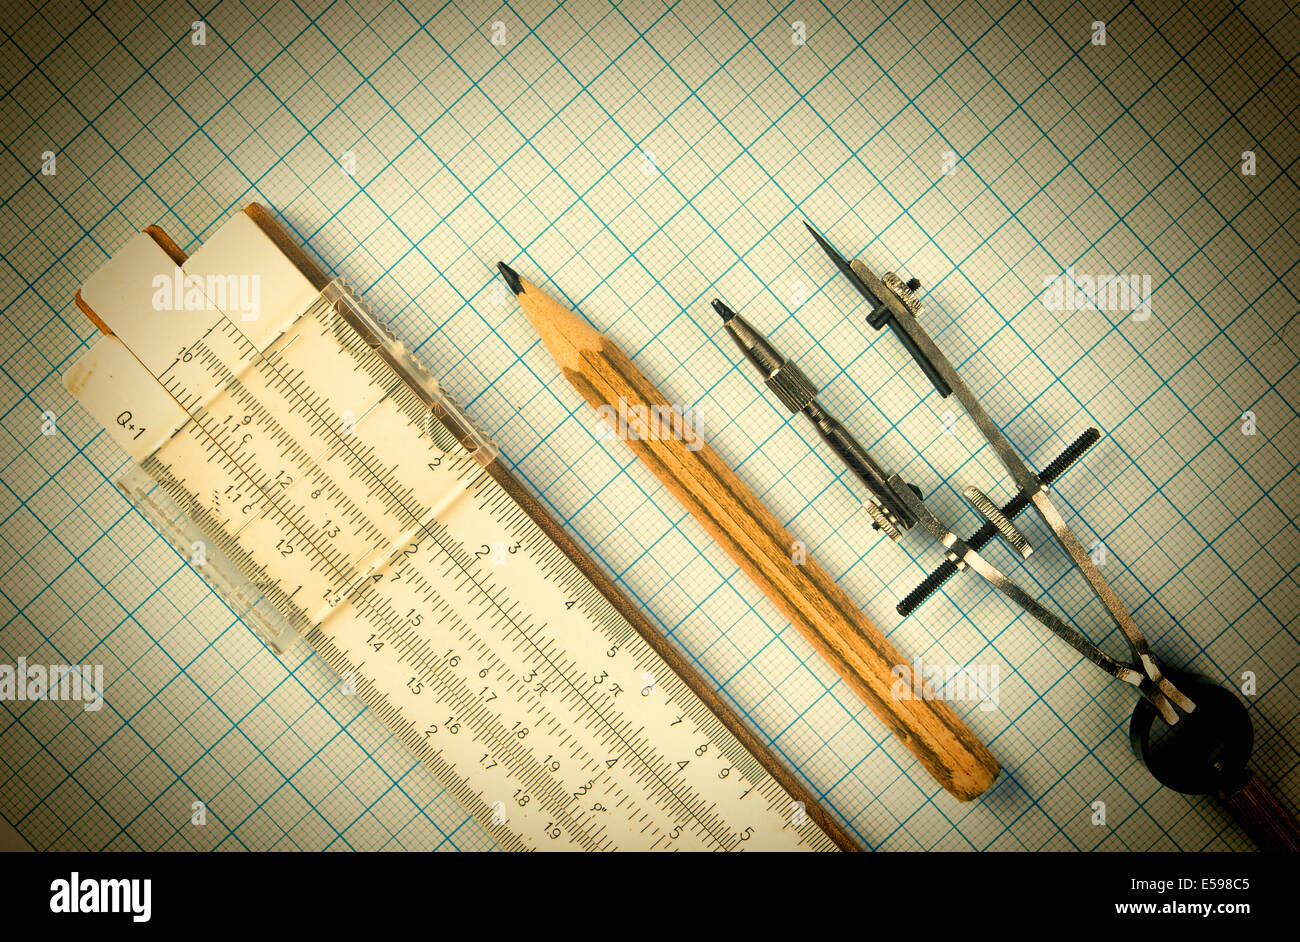 Old drawing tools on graph paper Stock Photo